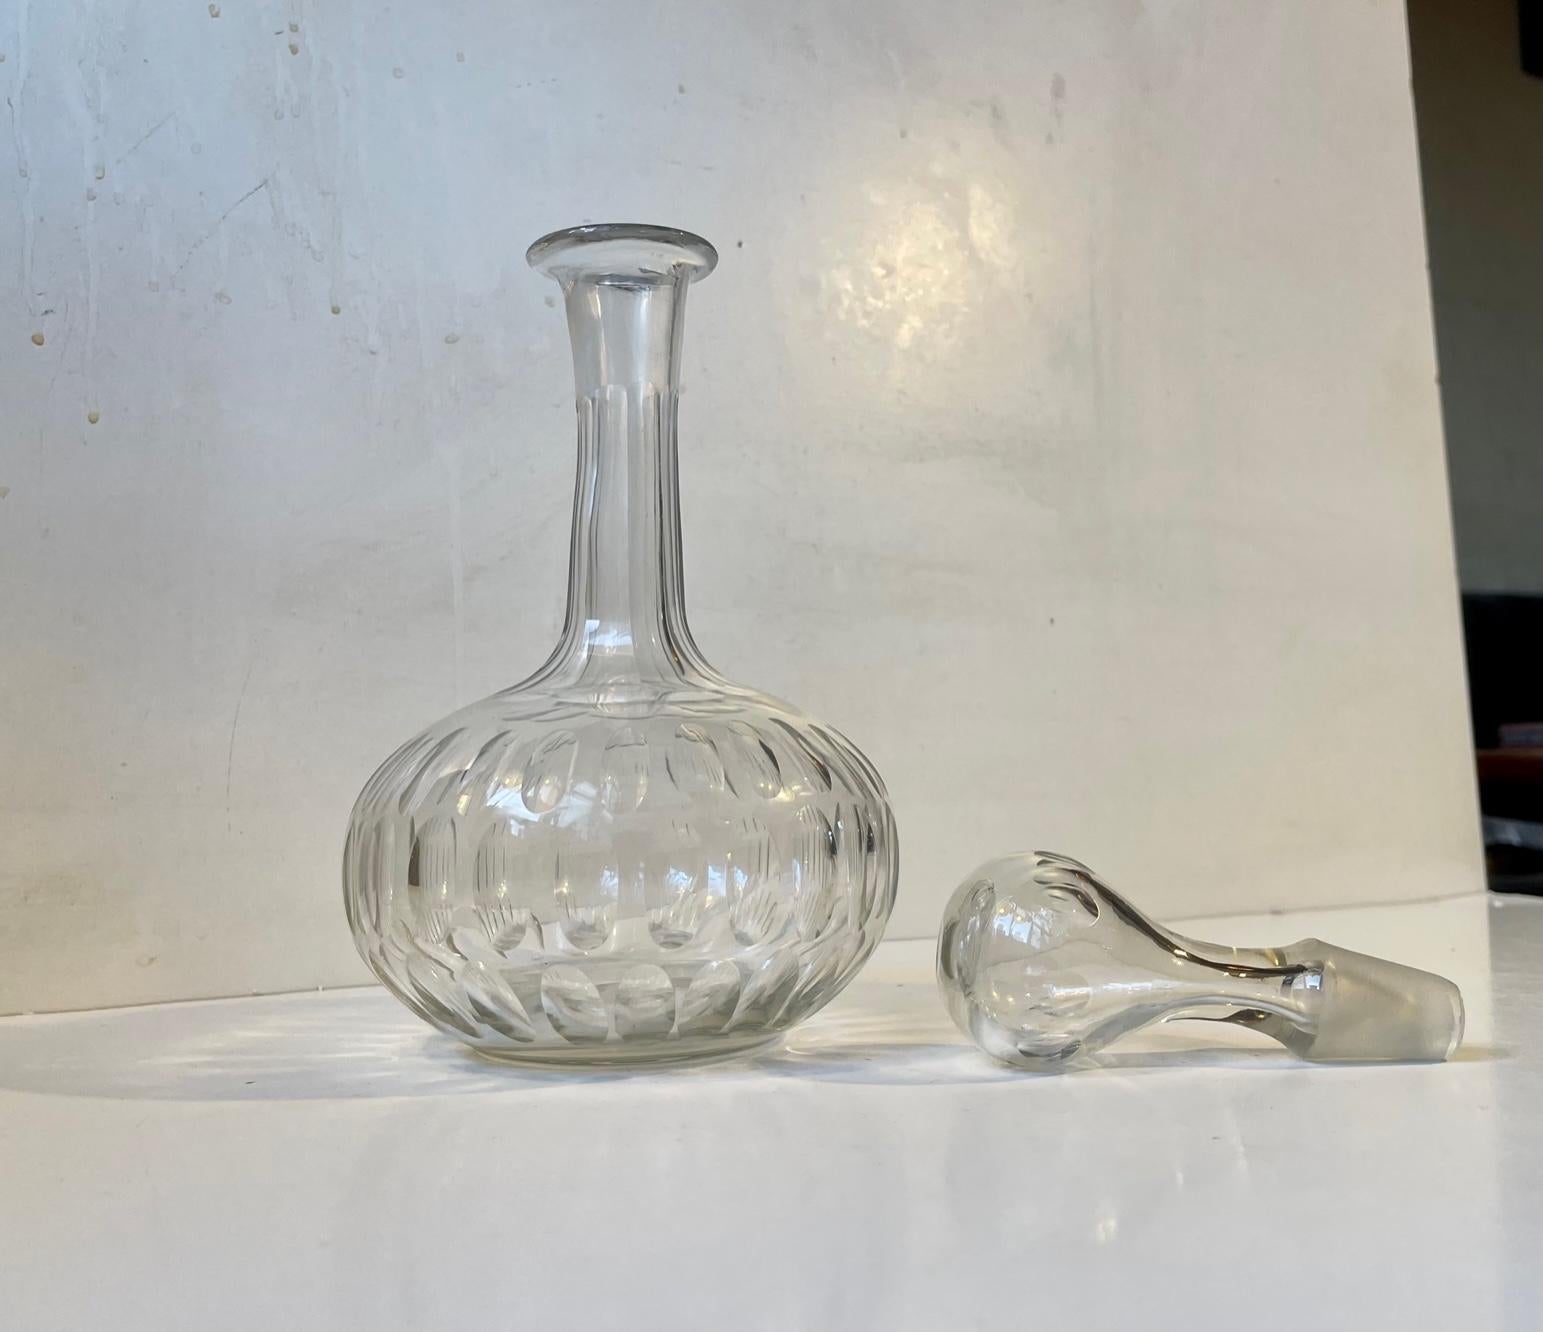 Beautiful cut crystal decanter from the 1920s. Made at Holmegaard in Denmark. The carafe is mouth-blown and cut with large ovale cuts around its perimeter. Its neck is multi-faceted and the drop-shaped stopper shares the same distinct Art Deco